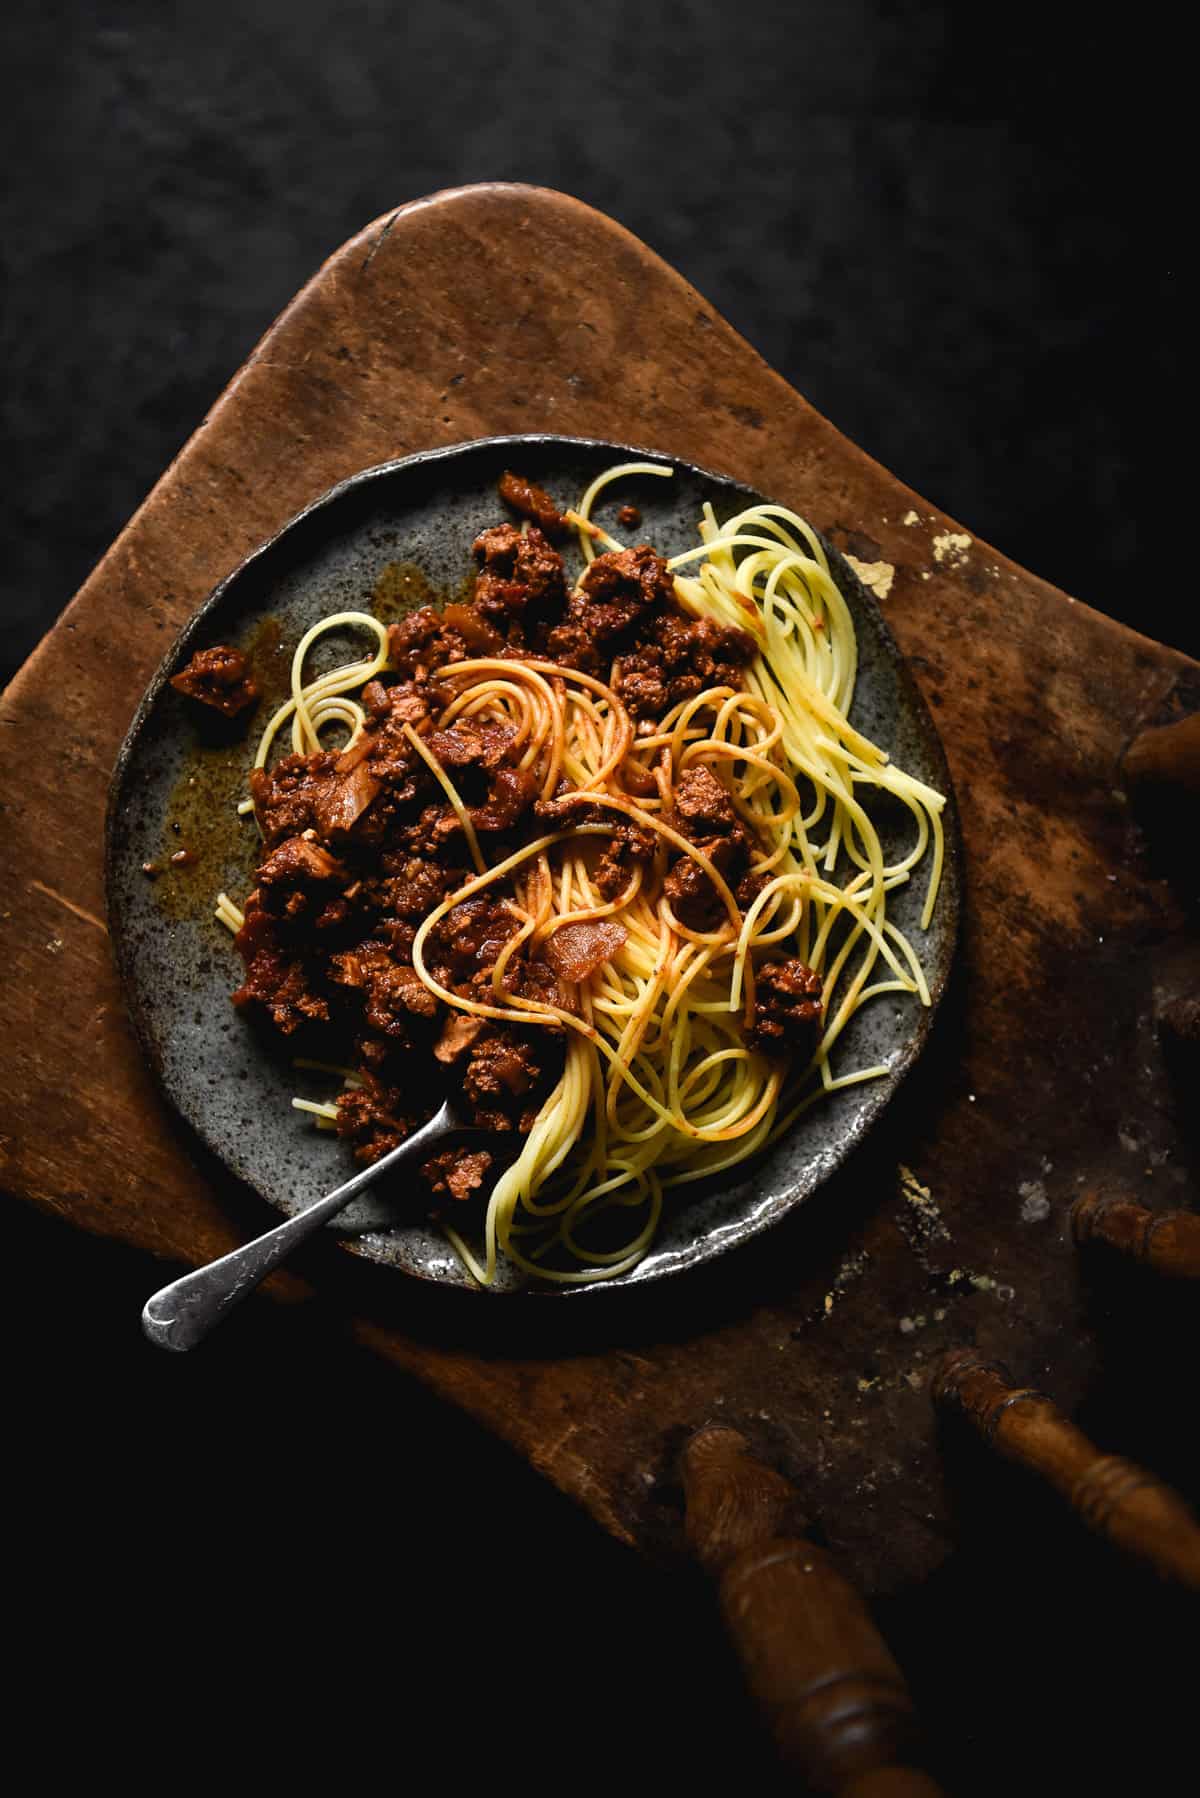 An aerial moody image of a plate of vegan bolognese on a wooden chair against a dark backdrop.